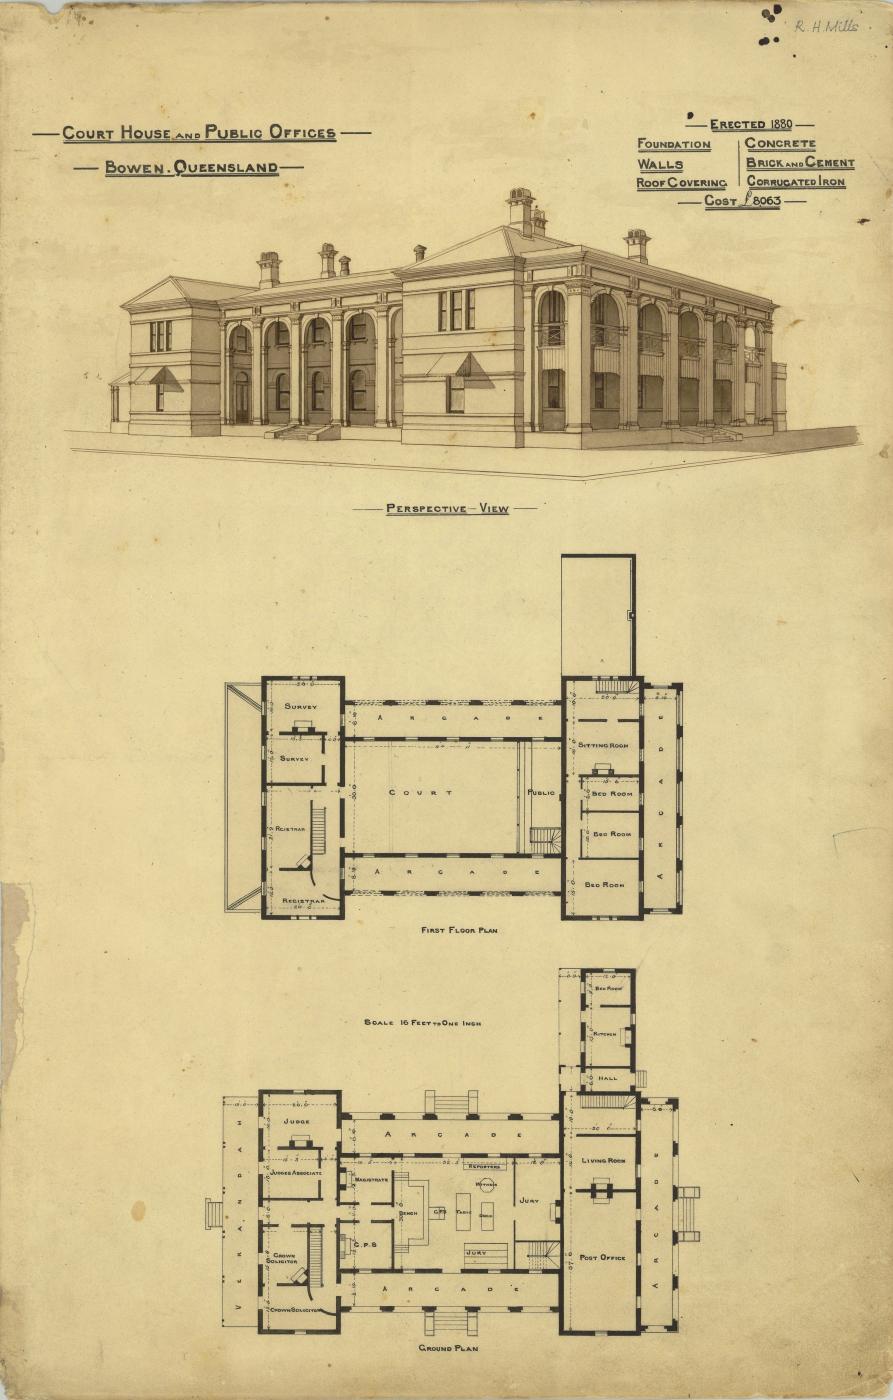 Architectural plan of the Court House and Public Offices, Bowen